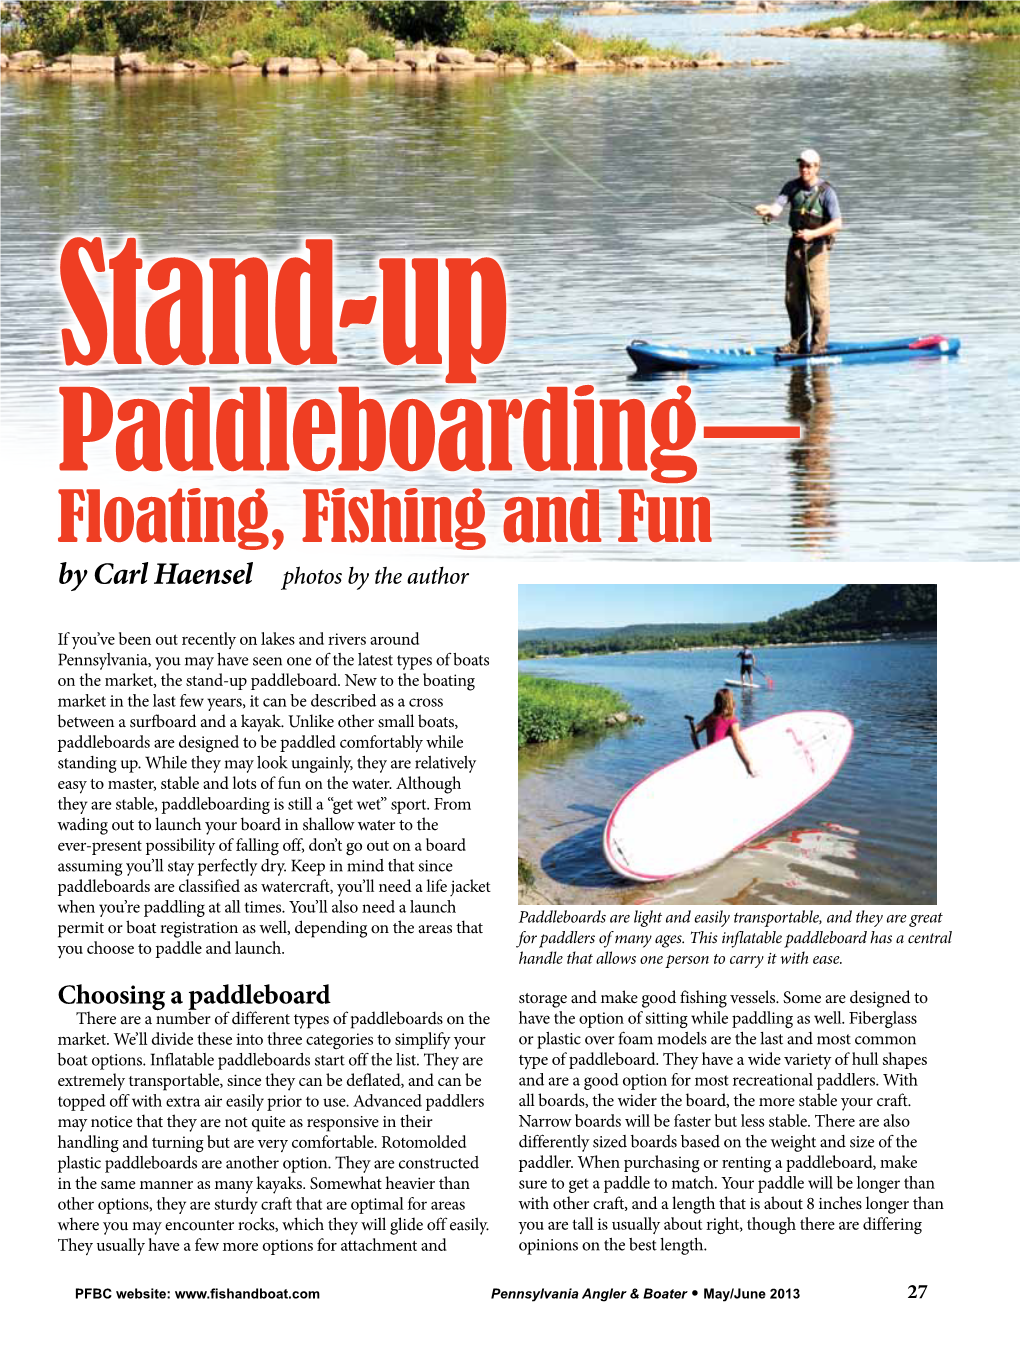 Paddleboarding— Floating, Fishing and Fun by Carl Haensel Photos by the Author